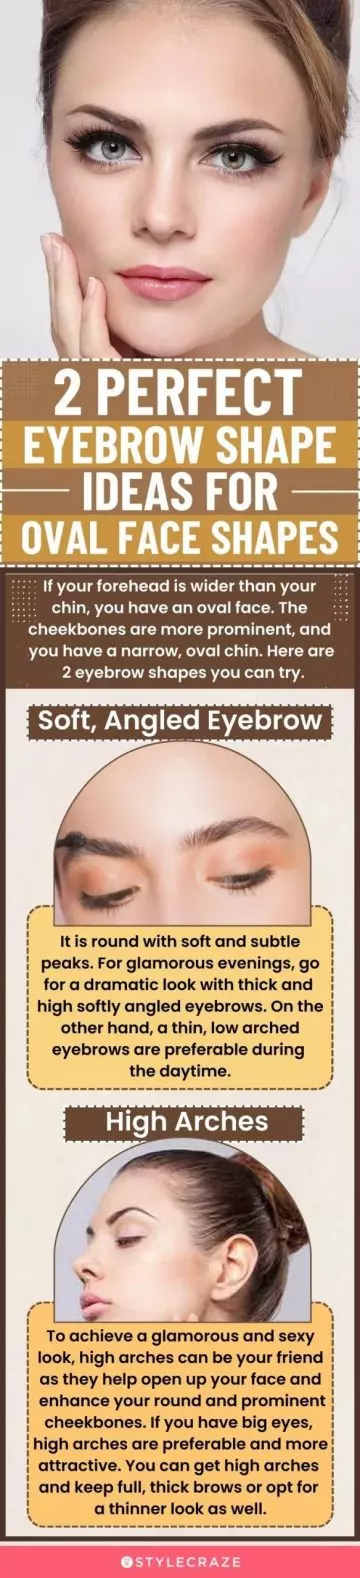 2 perfect eyebrow shape ideas for oval face shapes (infographic)